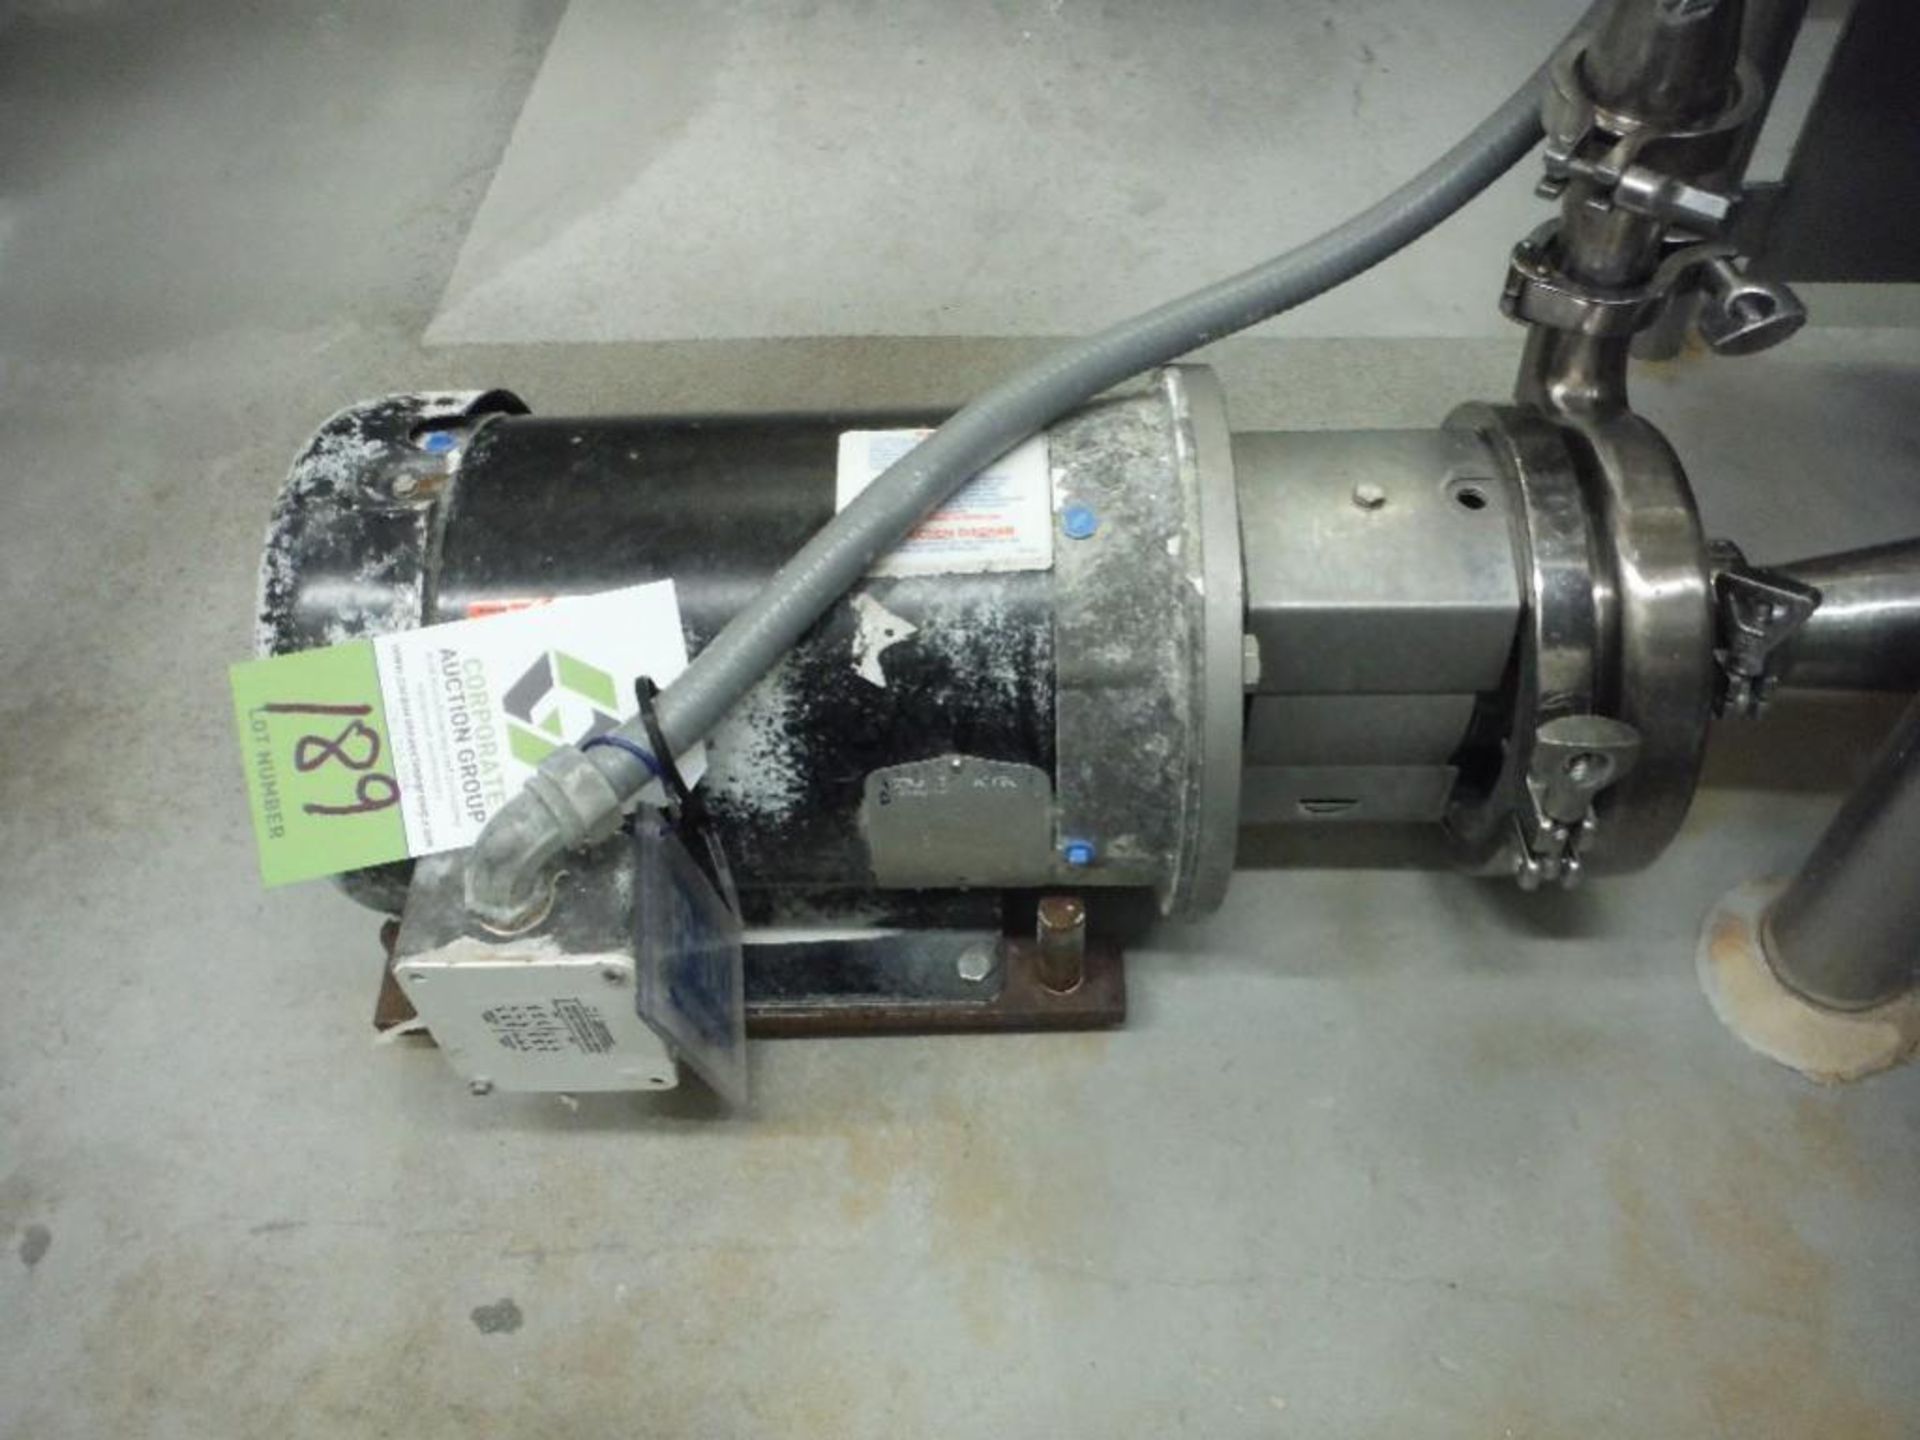 Ampco 3 hp sanitary centrifugal pump, Model AC216MDG18T. - RIGGING FEE FOR DOMESTIC TRANSPORT $100